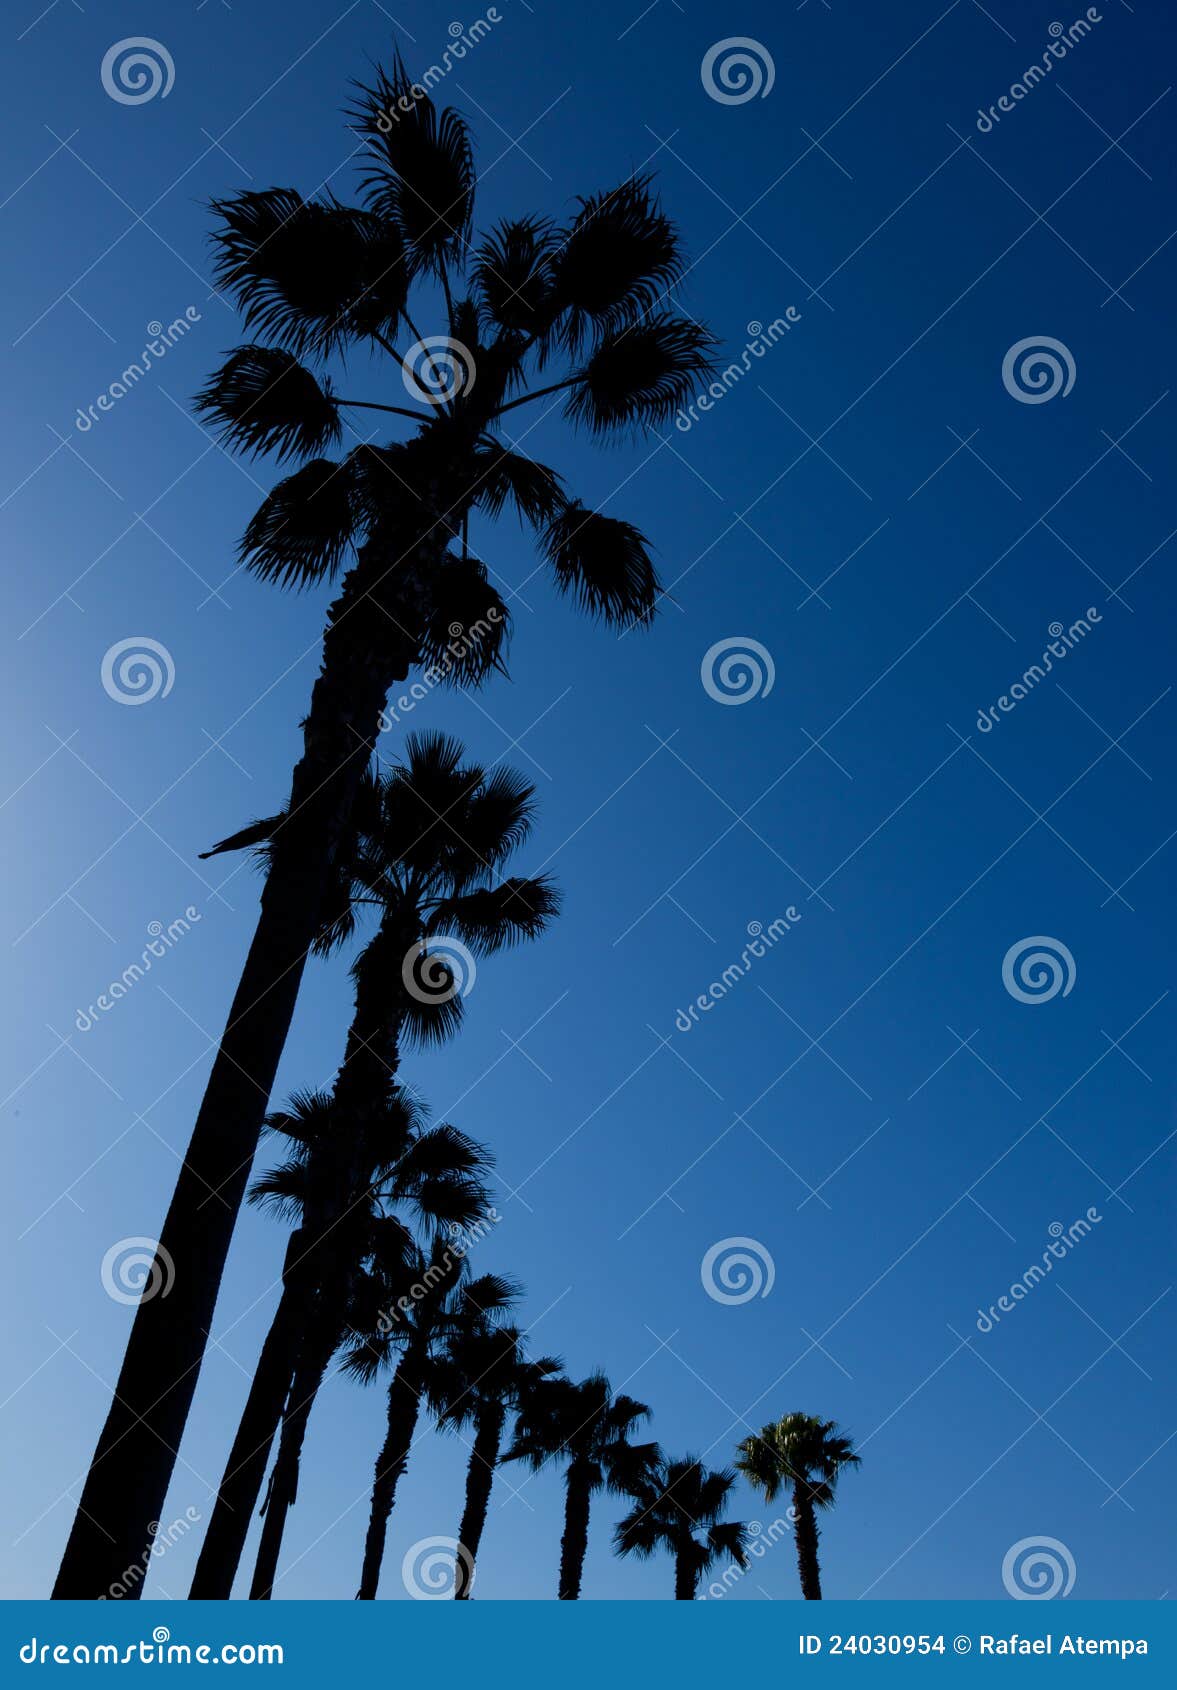 Palm Trees in San Diego stock photo. Image of beach, resort - 24030954